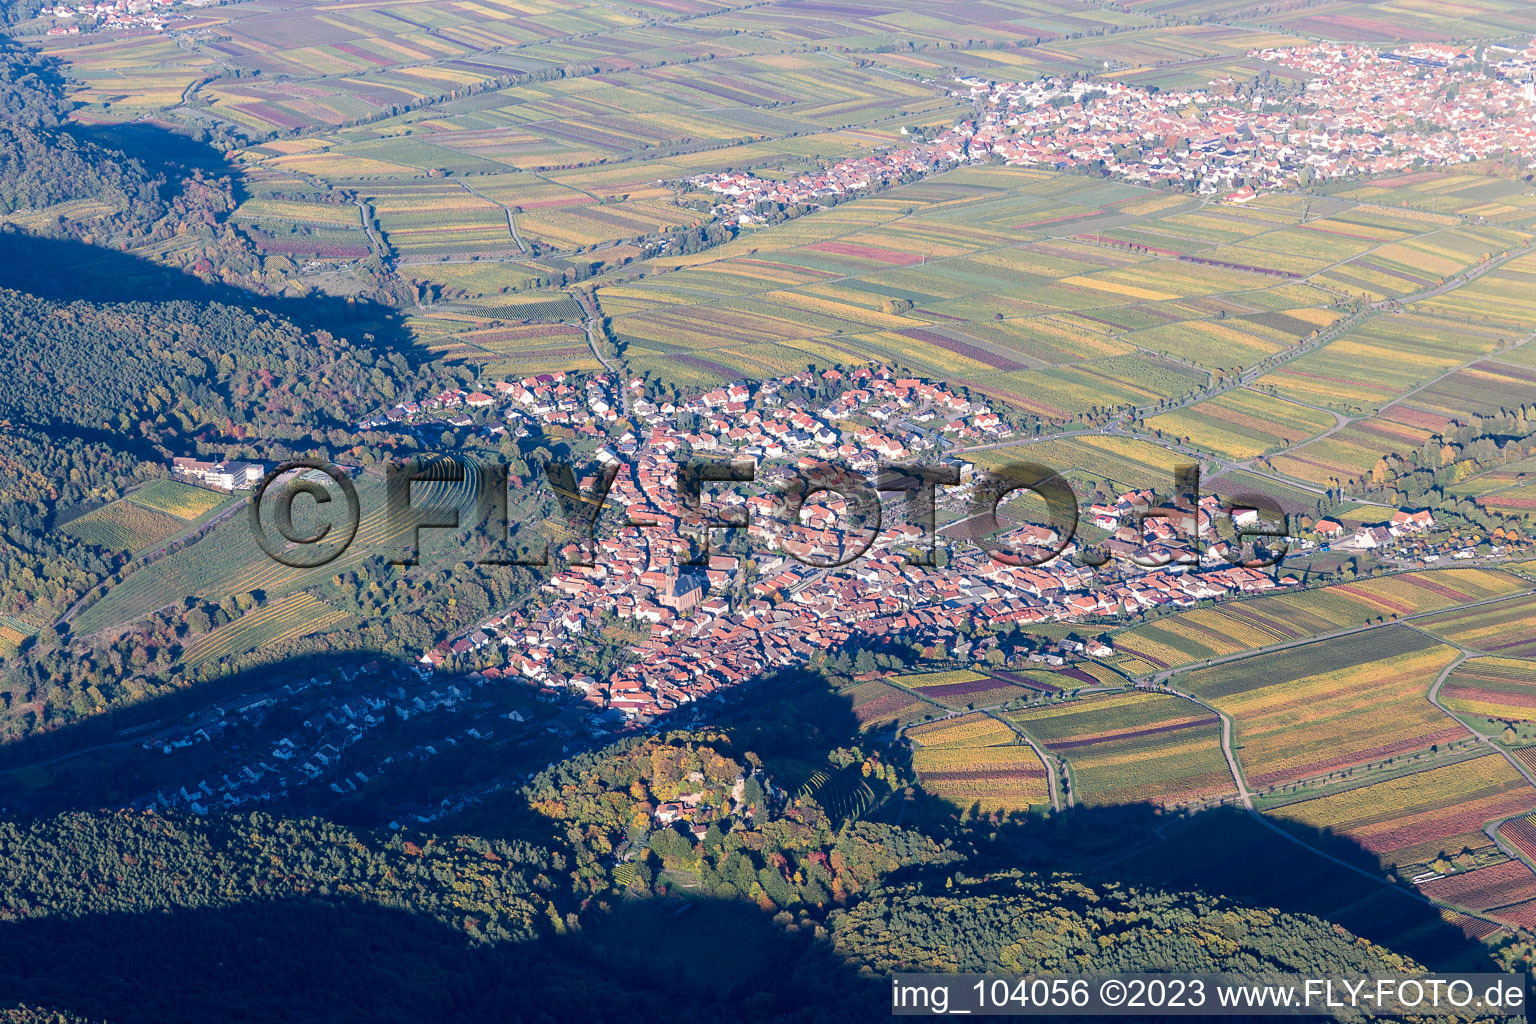 Aerial view of St. Martin in Sankt Martin in the state Rhineland-Palatinate, Germany